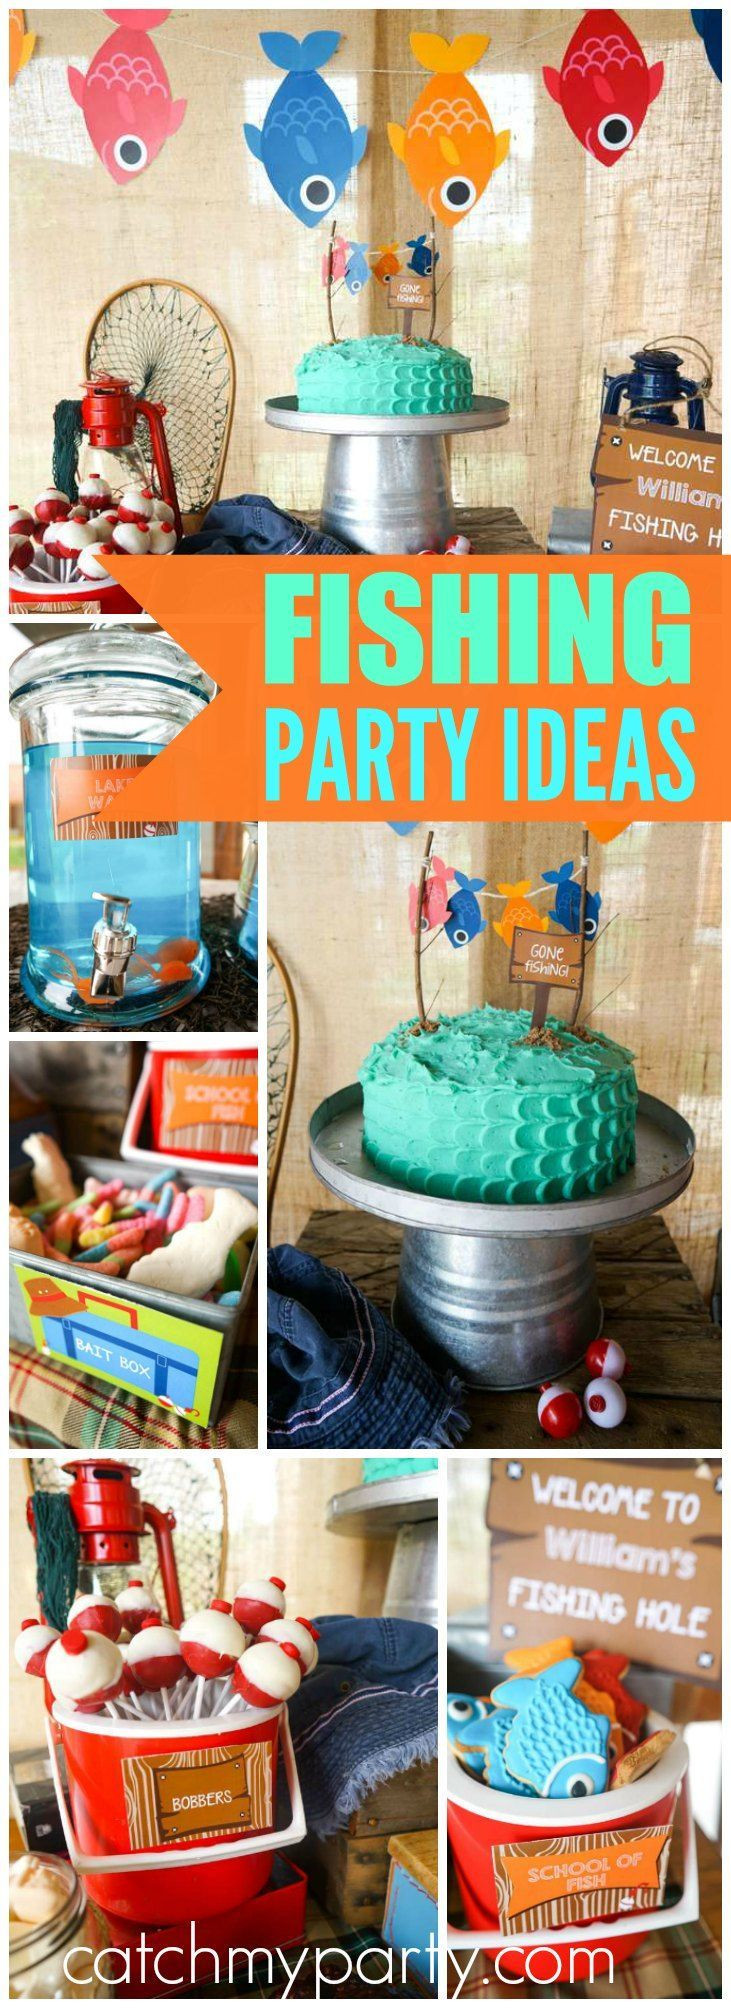 Fishing Retirement Party Ideas
 Fishing Party Birthday "William s Gone Fishing Party